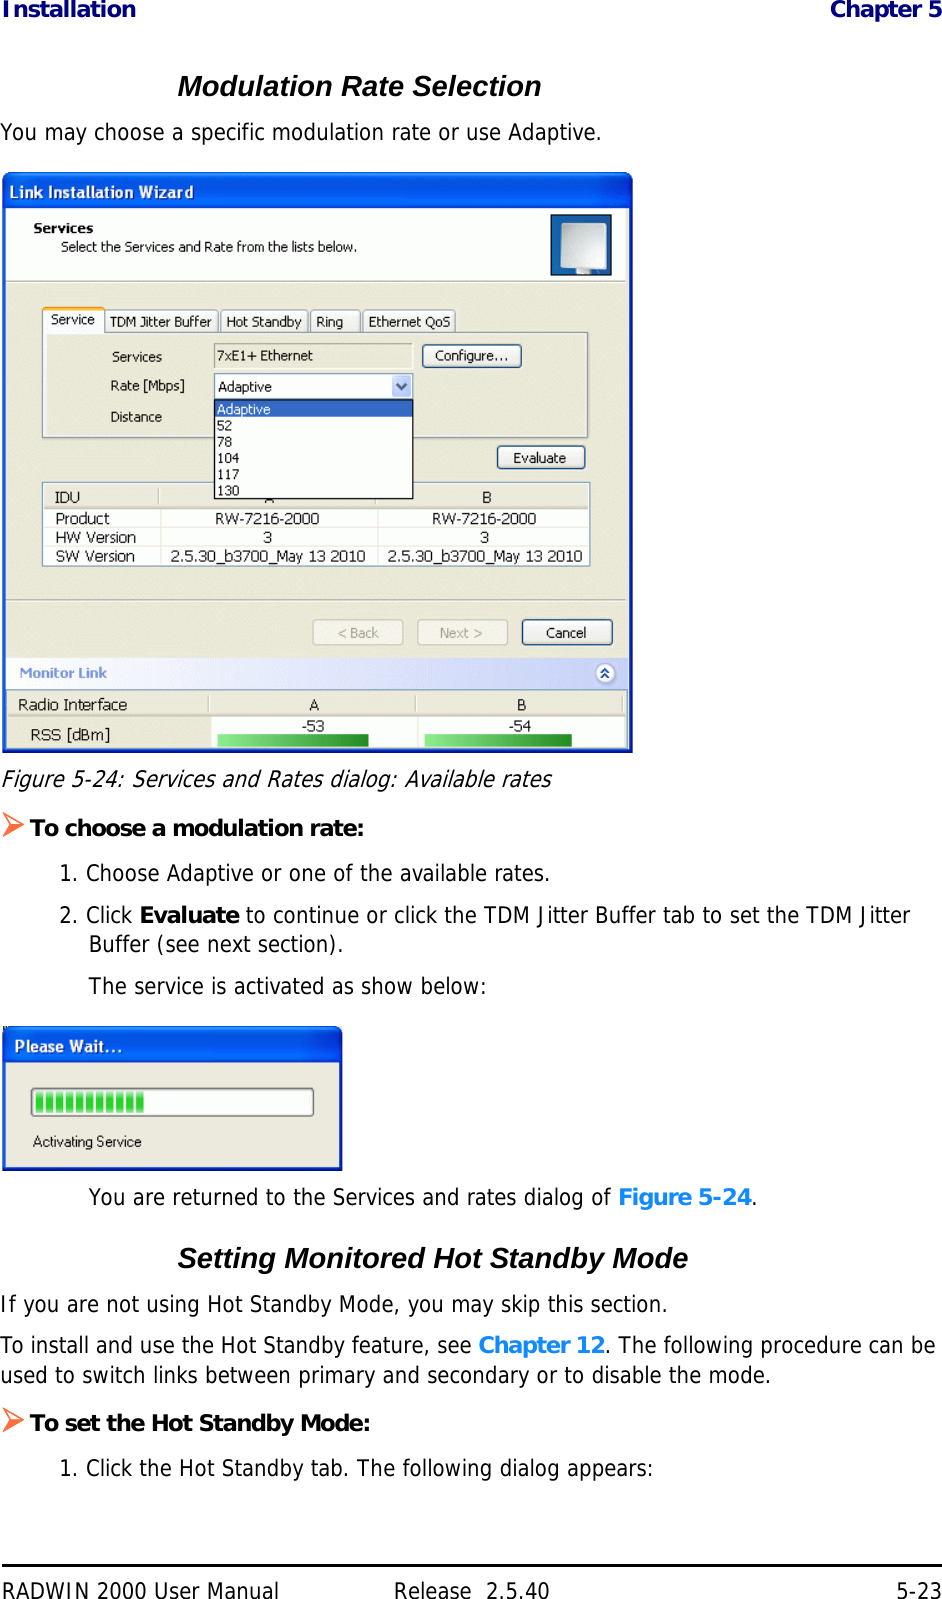 Installation Chapter 5RADWIN 2000 User Manual Release  2.5.40 5-23Modulation Rate SelectionYou may choose a specific modulation rate or use Adaptive.Figure 5-24: Services and Rates dialog: Available ratesTo choose a modulation rate:1. Choose Adaptive or one of the available rates.2. Click Evaluate to continue or click the TDM Jitter Buffer tab to set the TDM Jitter Buffer (see next section).The service is activated as show below:You are returned to the Services and rates dialog of Figure 5-24.Setting Monitored Hot Standby ModeIf you are not using Hot Standby Mode, you may skip this section.To install and use the Hot Standby feature, see Chapter 12. The following procedure can be used to switch links between primary and secondary or to disable the mode.To set the Hot Standby Mode:1. Click the Hot Standby tab. The following dialog appears: